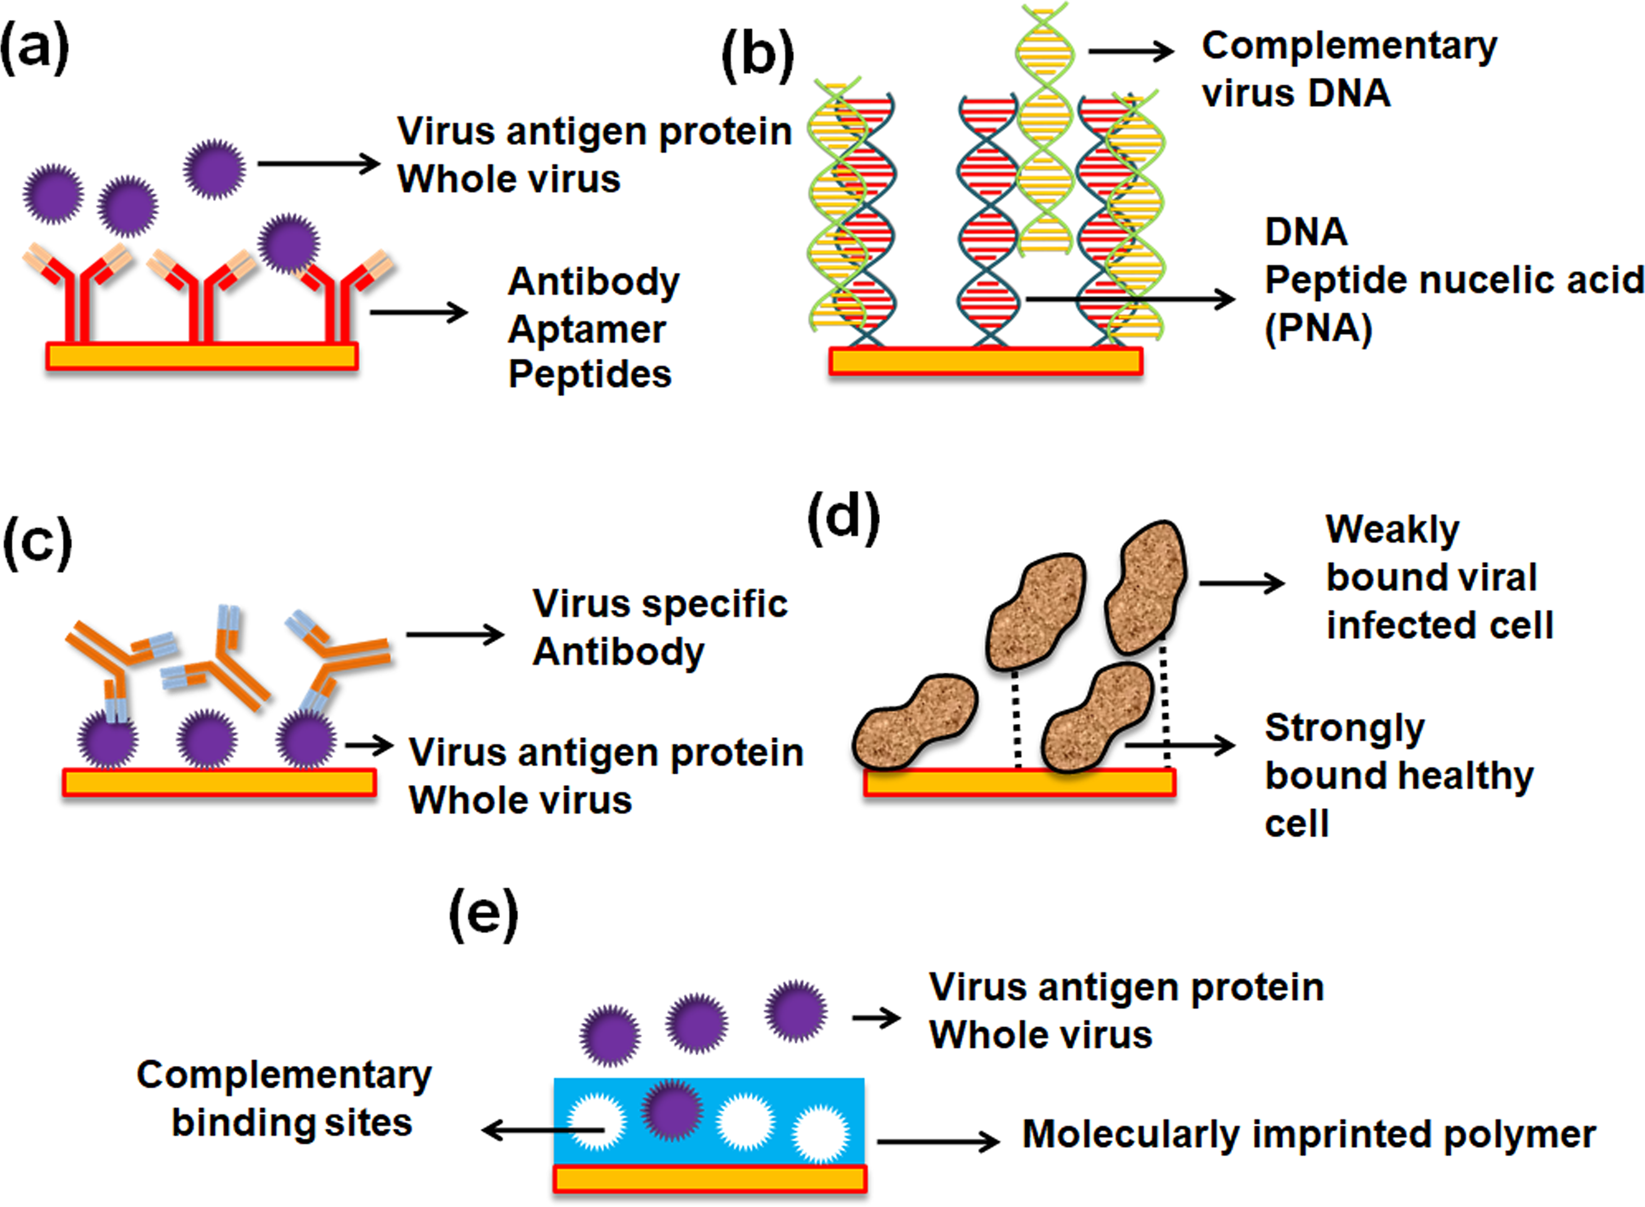 A comprehensive review on plasmonic-based biosensors used in viral